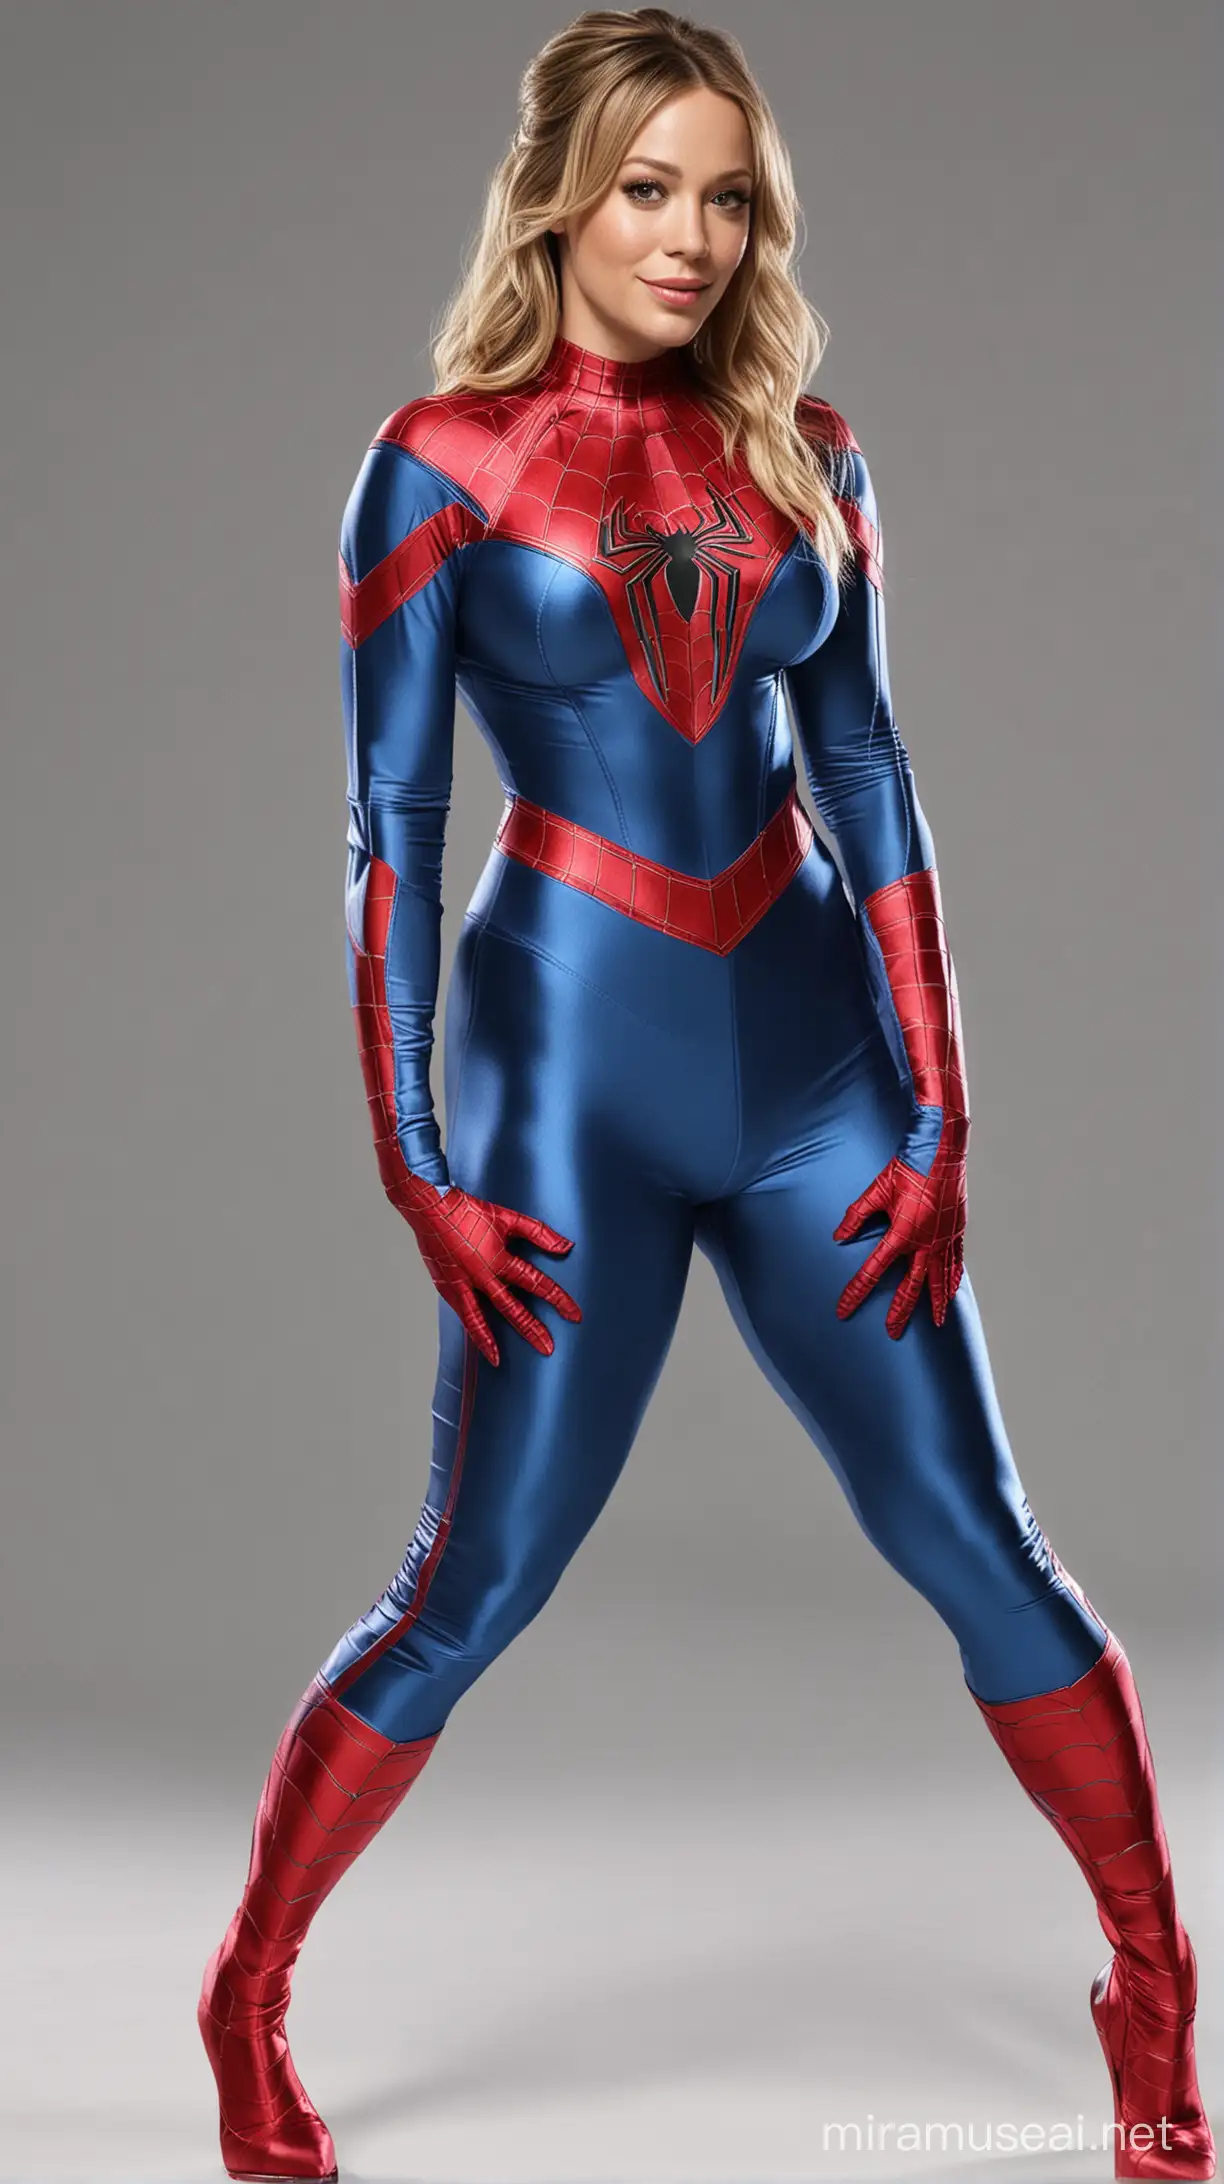 Hilary Duff in Spider-Man satin costume with pants, vibrant red and blue colors, superhero stance, high-resolution, comic book style, bright and colorful, dynamic pose, satin material, detailed facial features, Hollywood actress, iconic superhero outfit, professional lighting